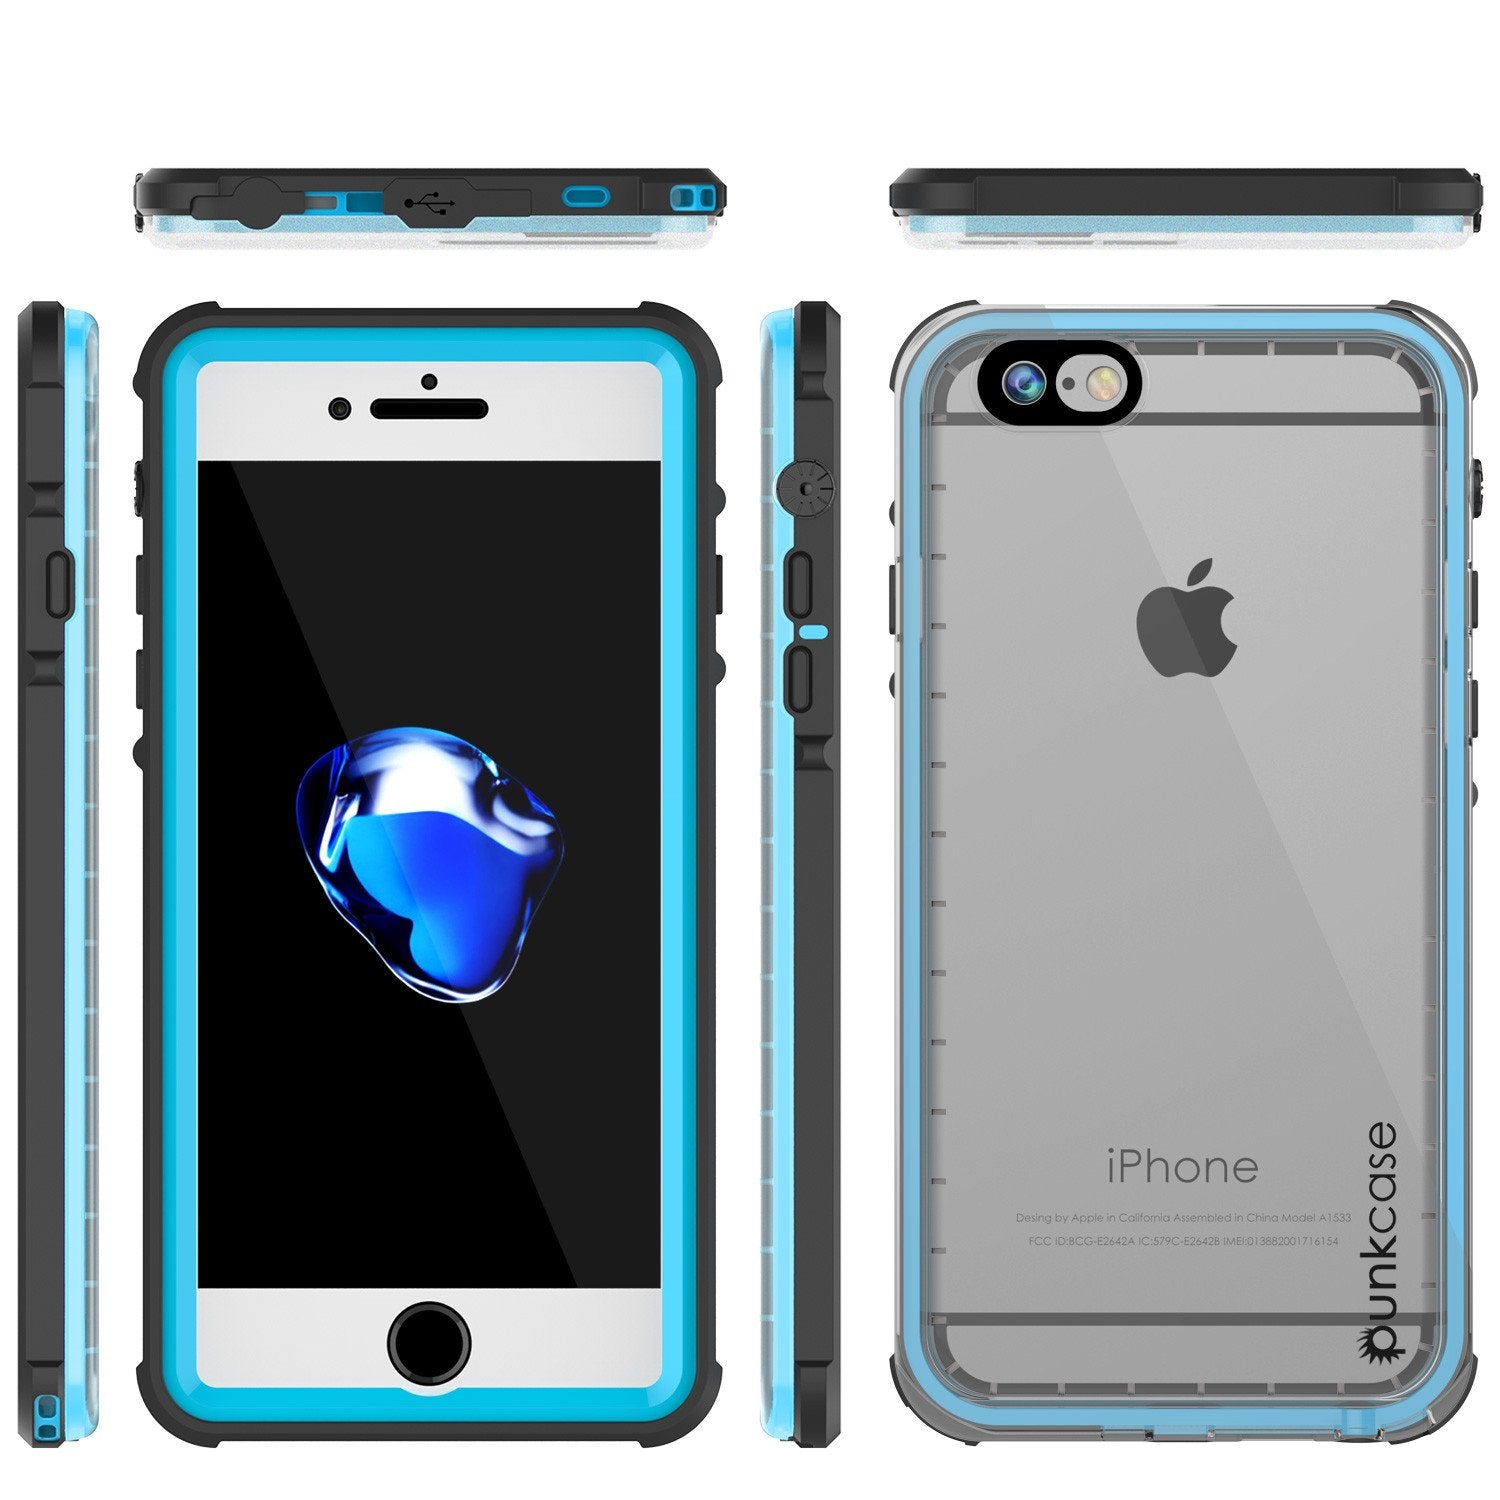 Apple iPhone 7 Waterproof Case, PUNKcase CRYSTAL Light Blue  W/ Attached Screen Protector  | Warranty